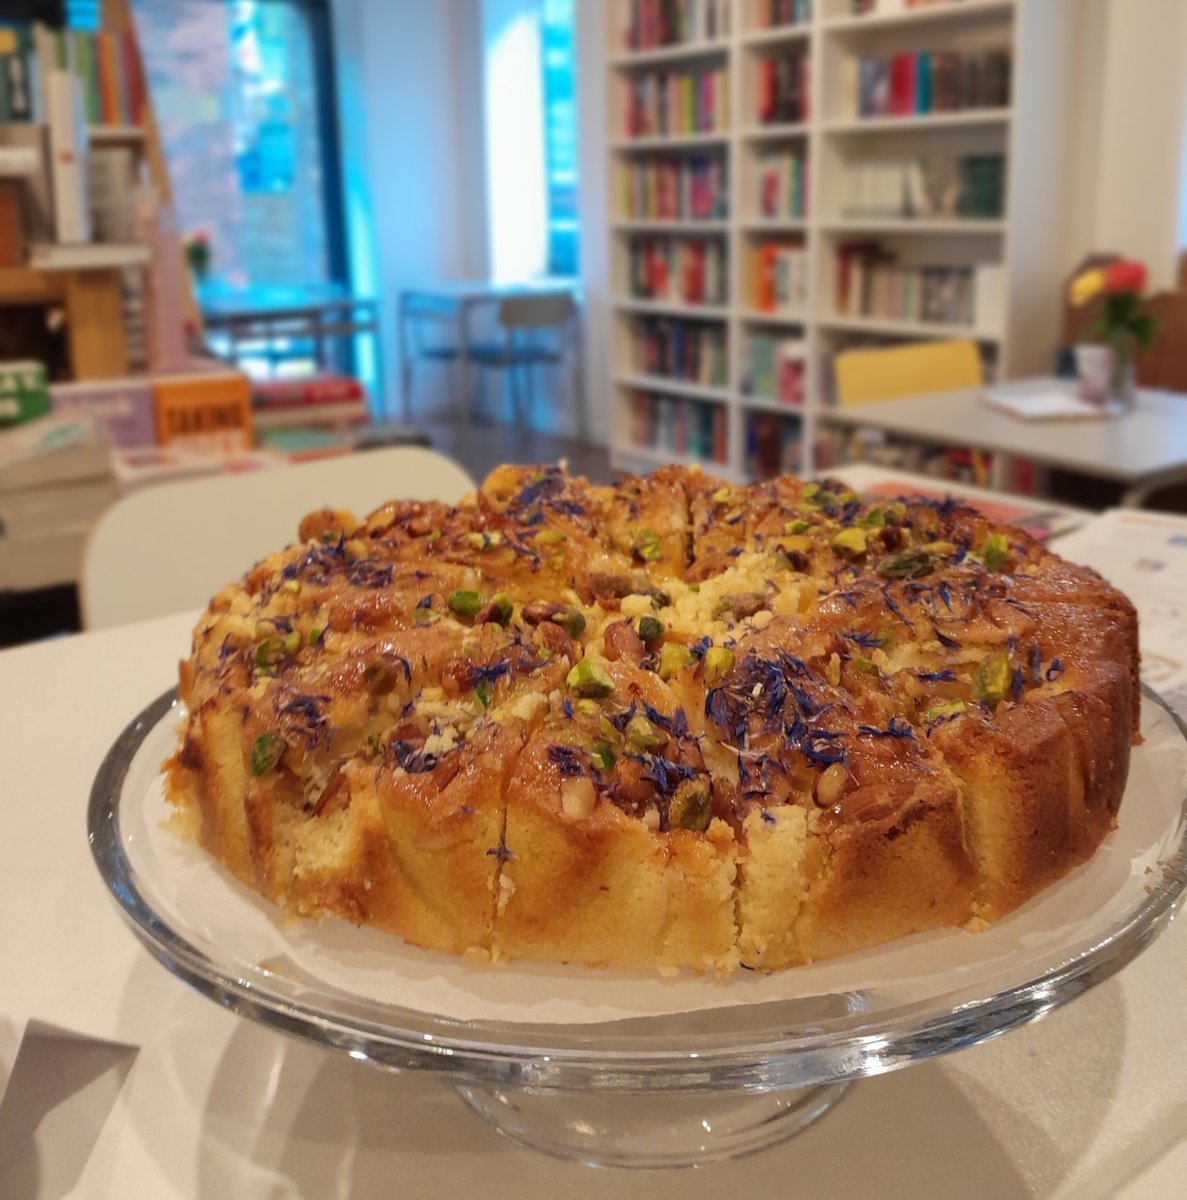 Two things. 1. We're having a SALE! 50% off selected books between today and Monday. This is only for a limited time over the Bank Holiday, so head down to see what we've got discounted! 2. New cake on the counter. Apricot & pistachio frangipane. That is all.